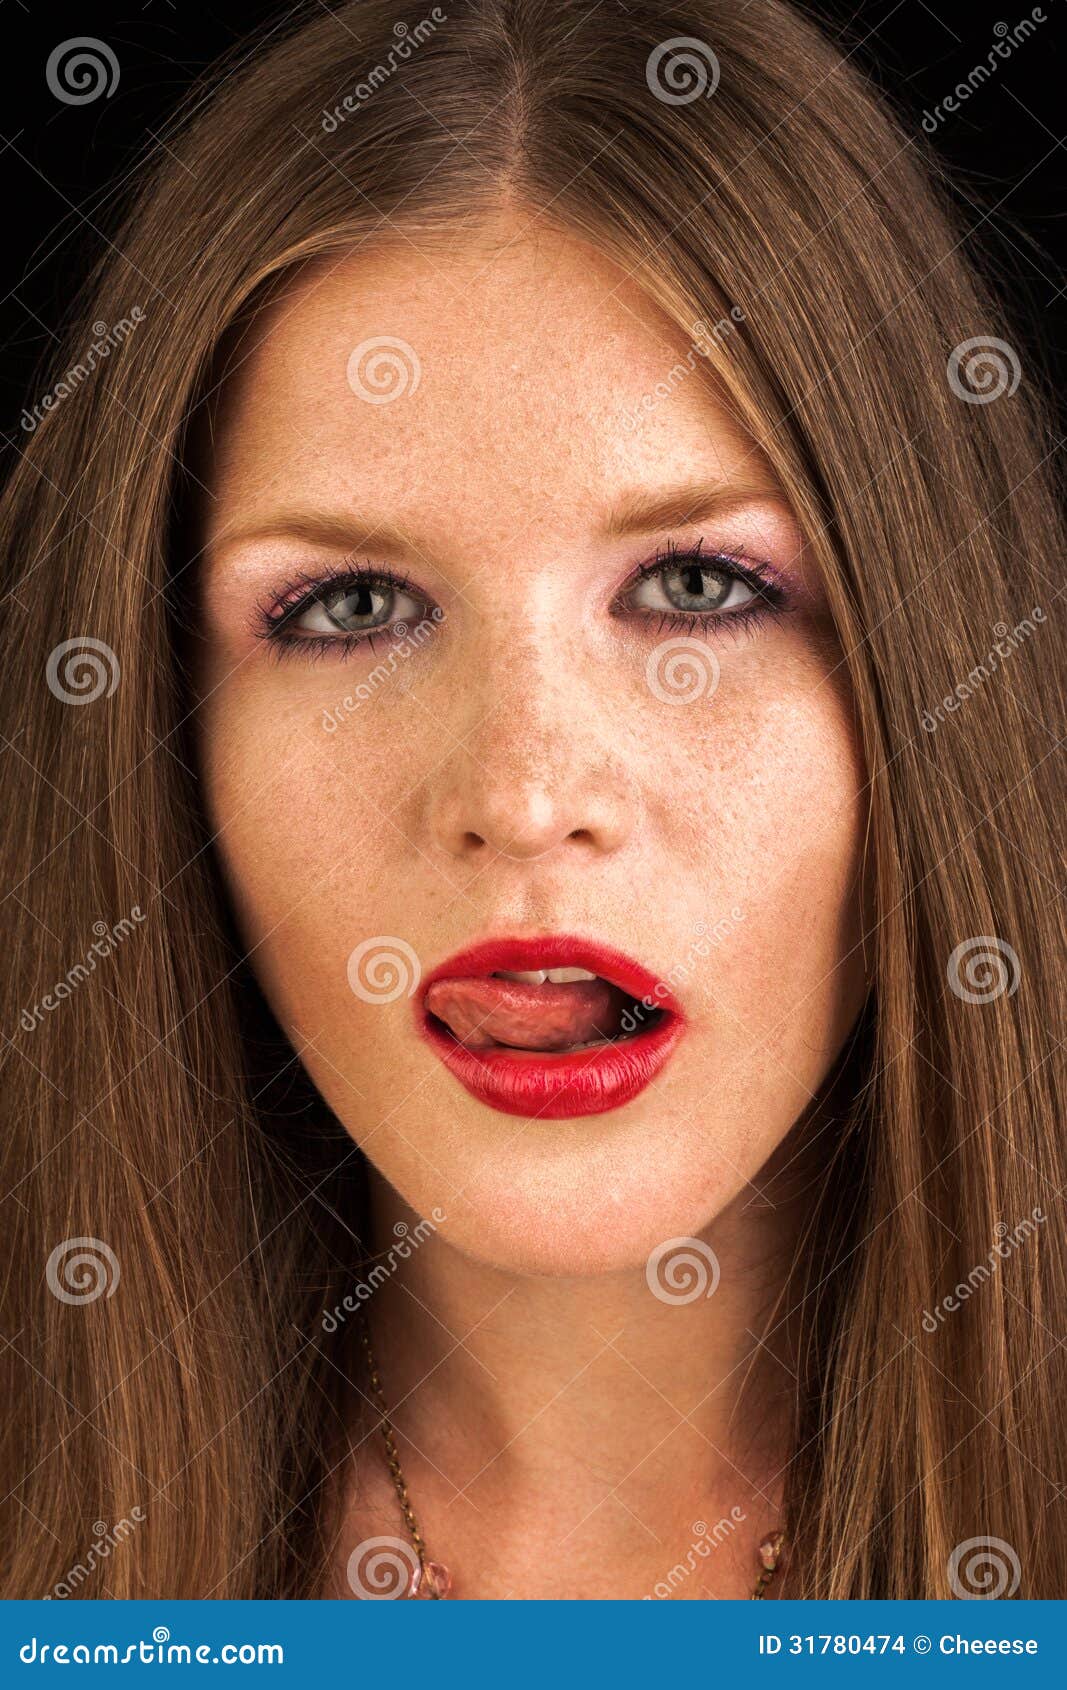 Sexy Fashion Girl With Red Lipstick Lick Her Lips Stock Images Image